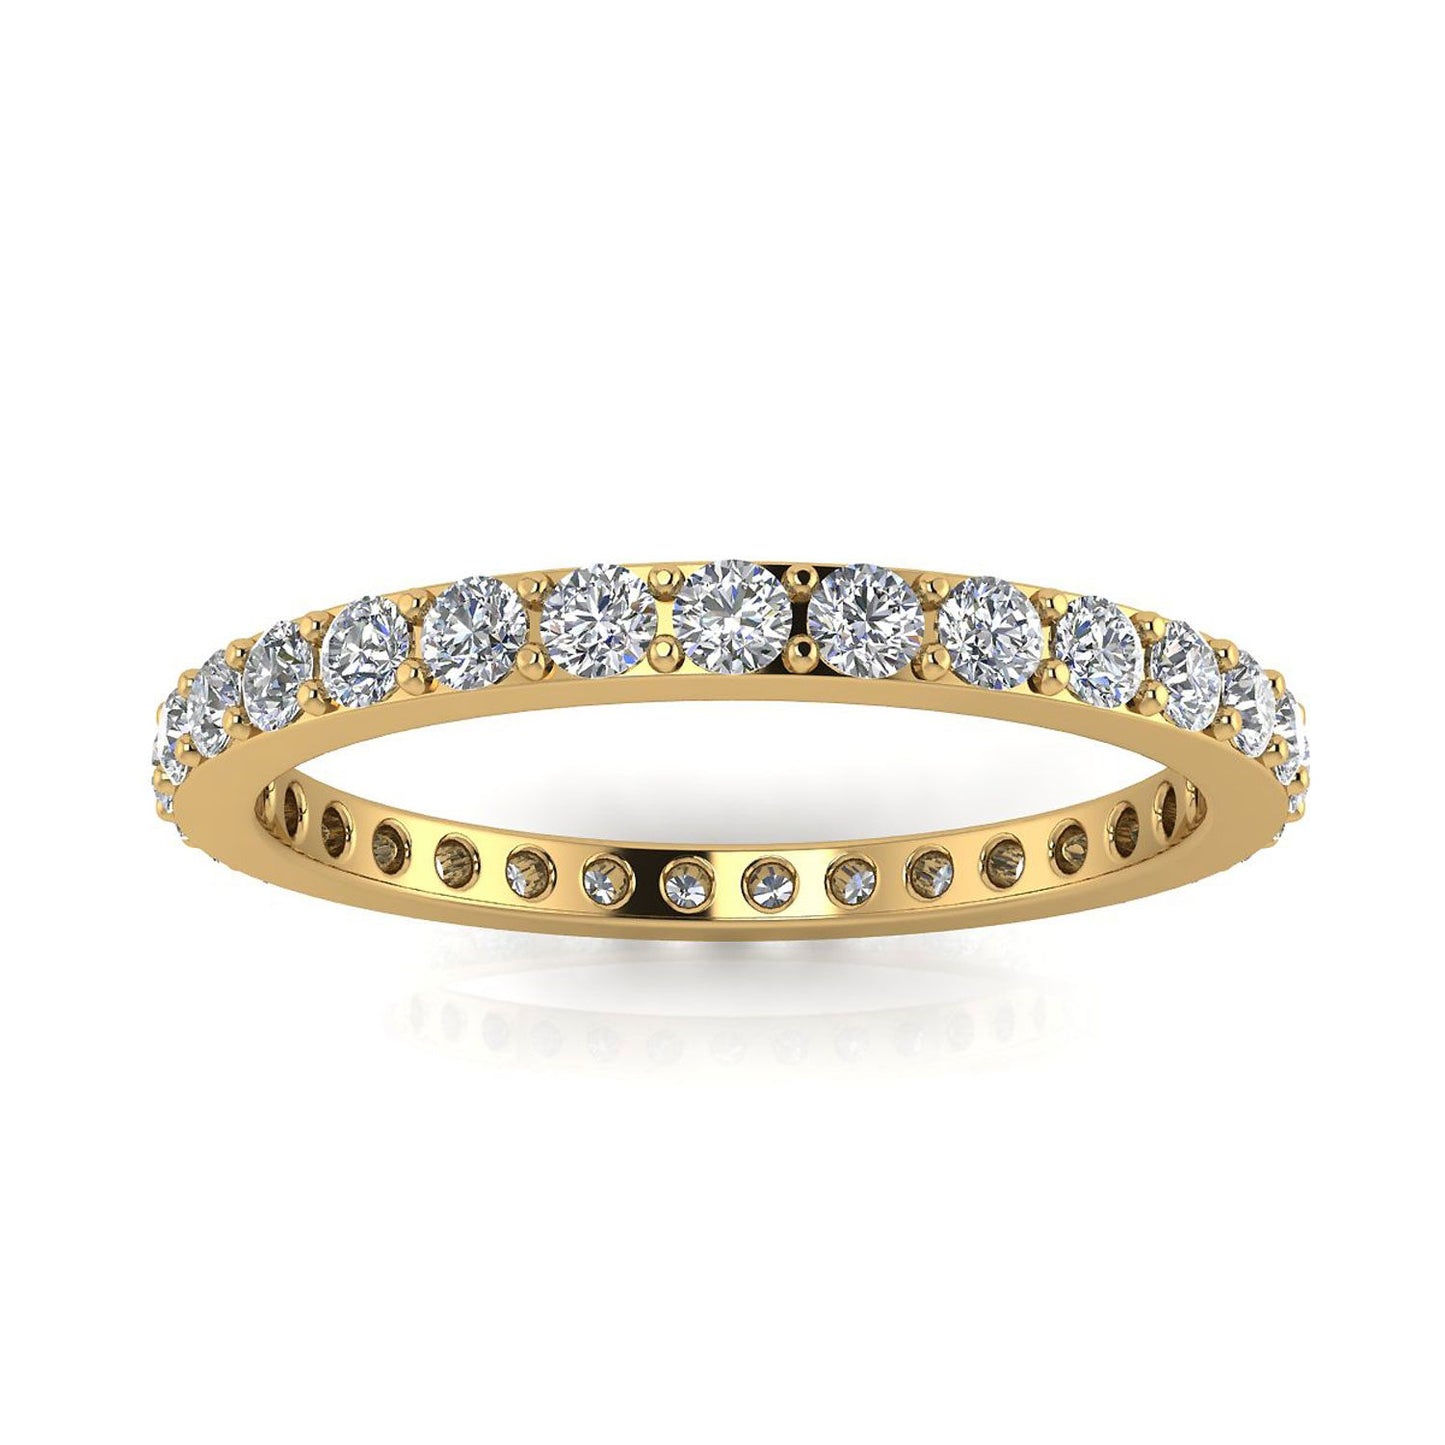 Round Brilliant Cut Diamond Pave Set Eternity Ring In 14k Yellow Gold  (0.74ct. Tw.) Ring Size 8.5